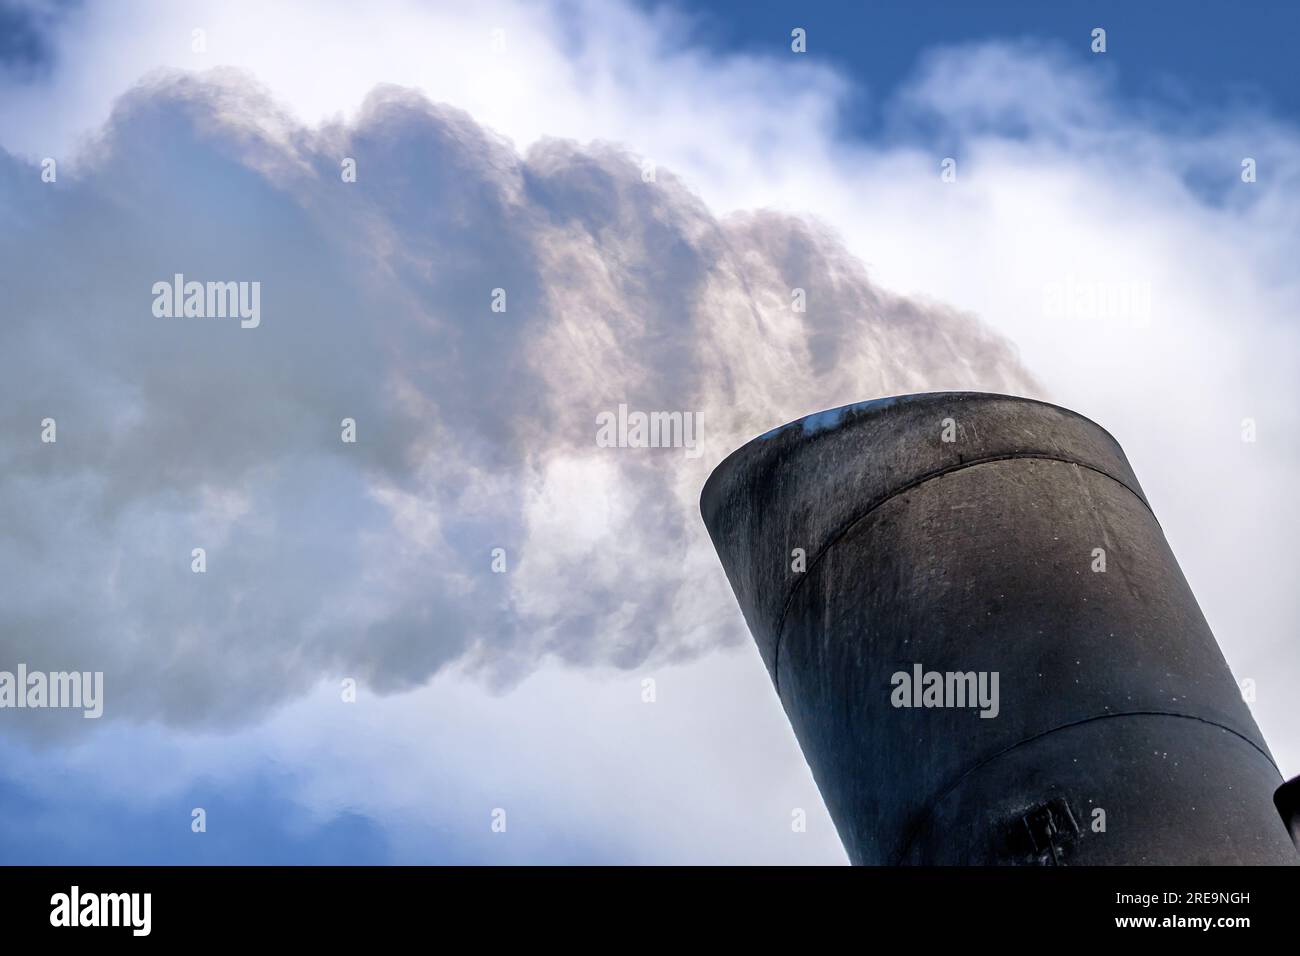 Exhaust emissions coming from a ship's funnel. Stock Photo